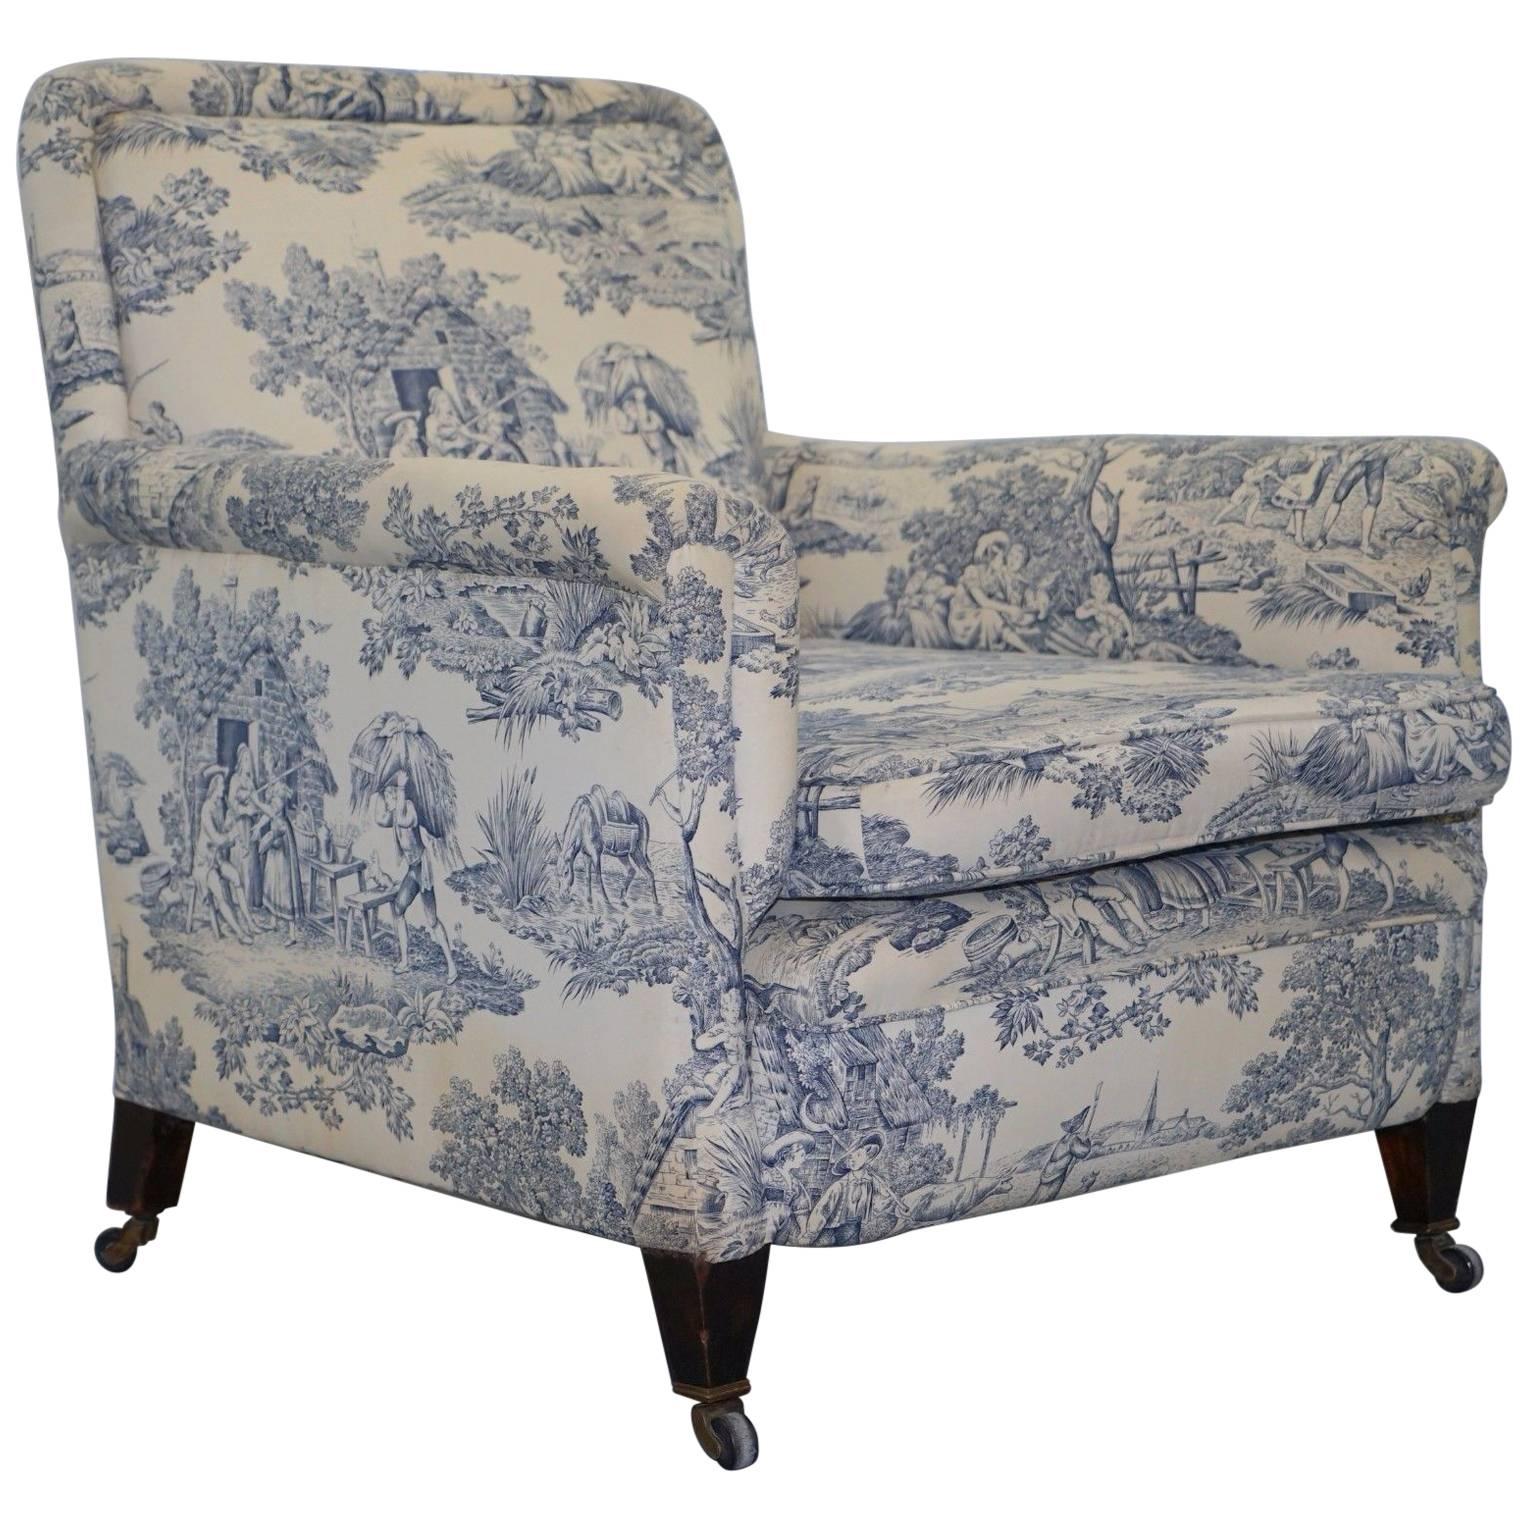 Original WG 1738 Stamped French Club Armchair Inc Toile de Jouy Style Upholstery